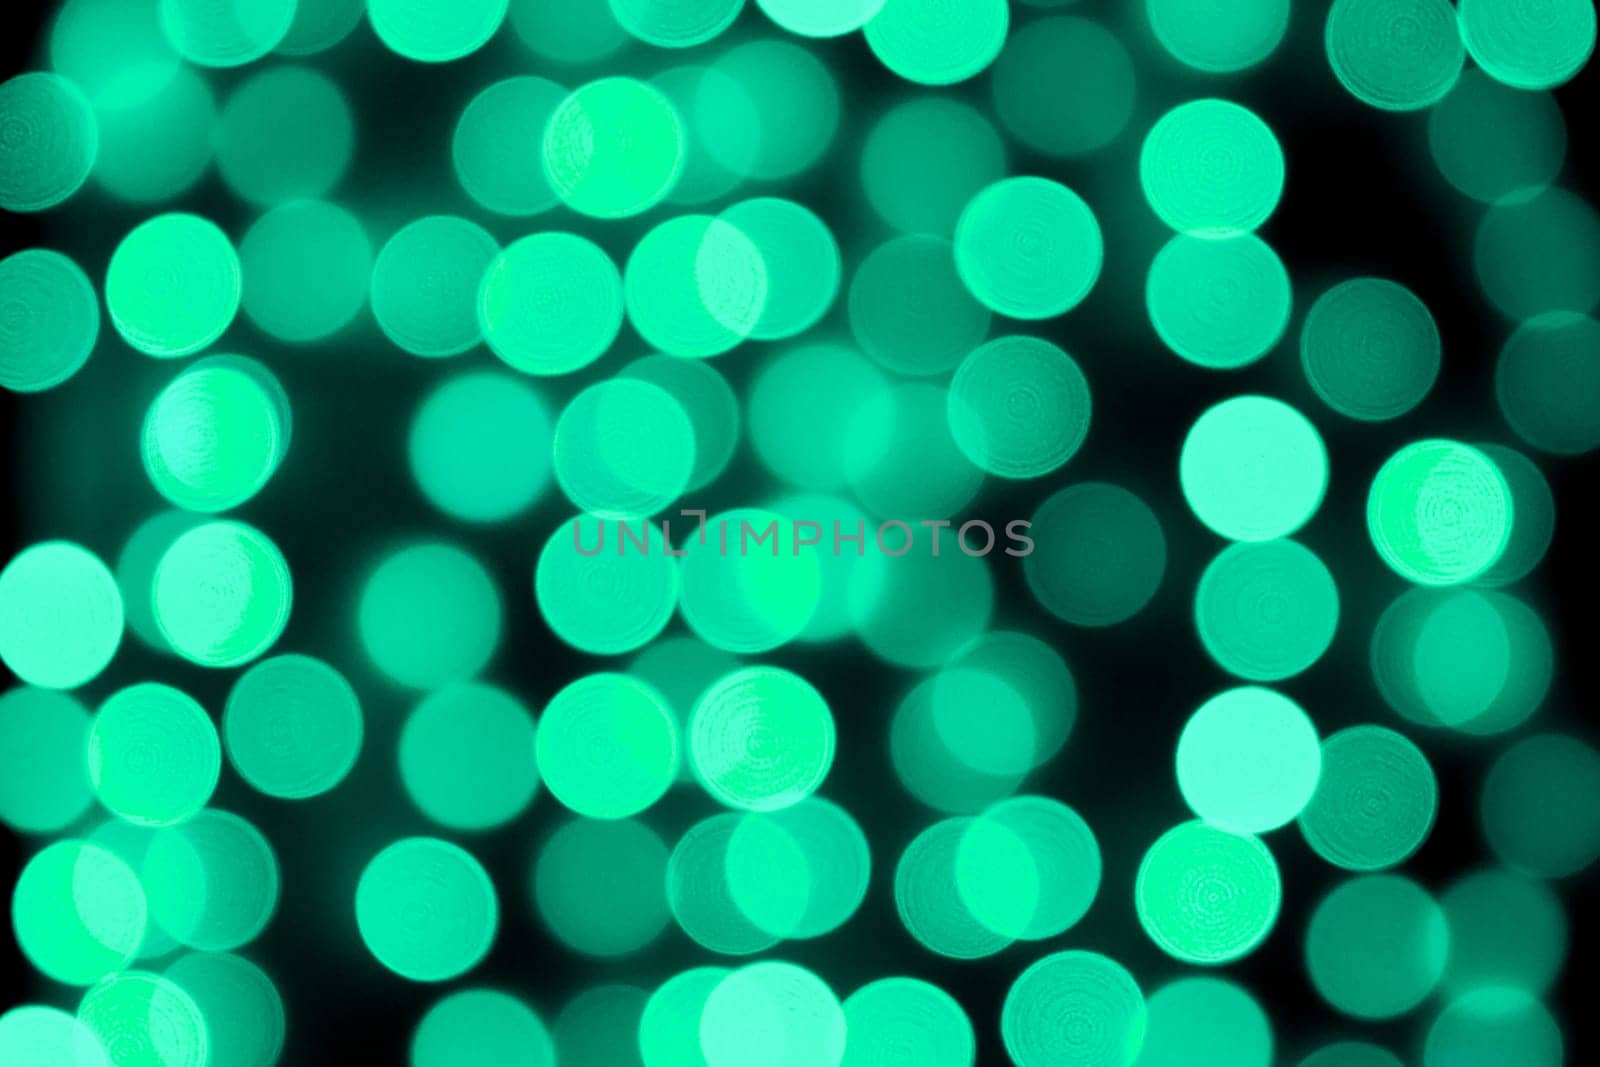 Unfocused abstract colourful bokeh black background. defocused and blurred many round blue light.